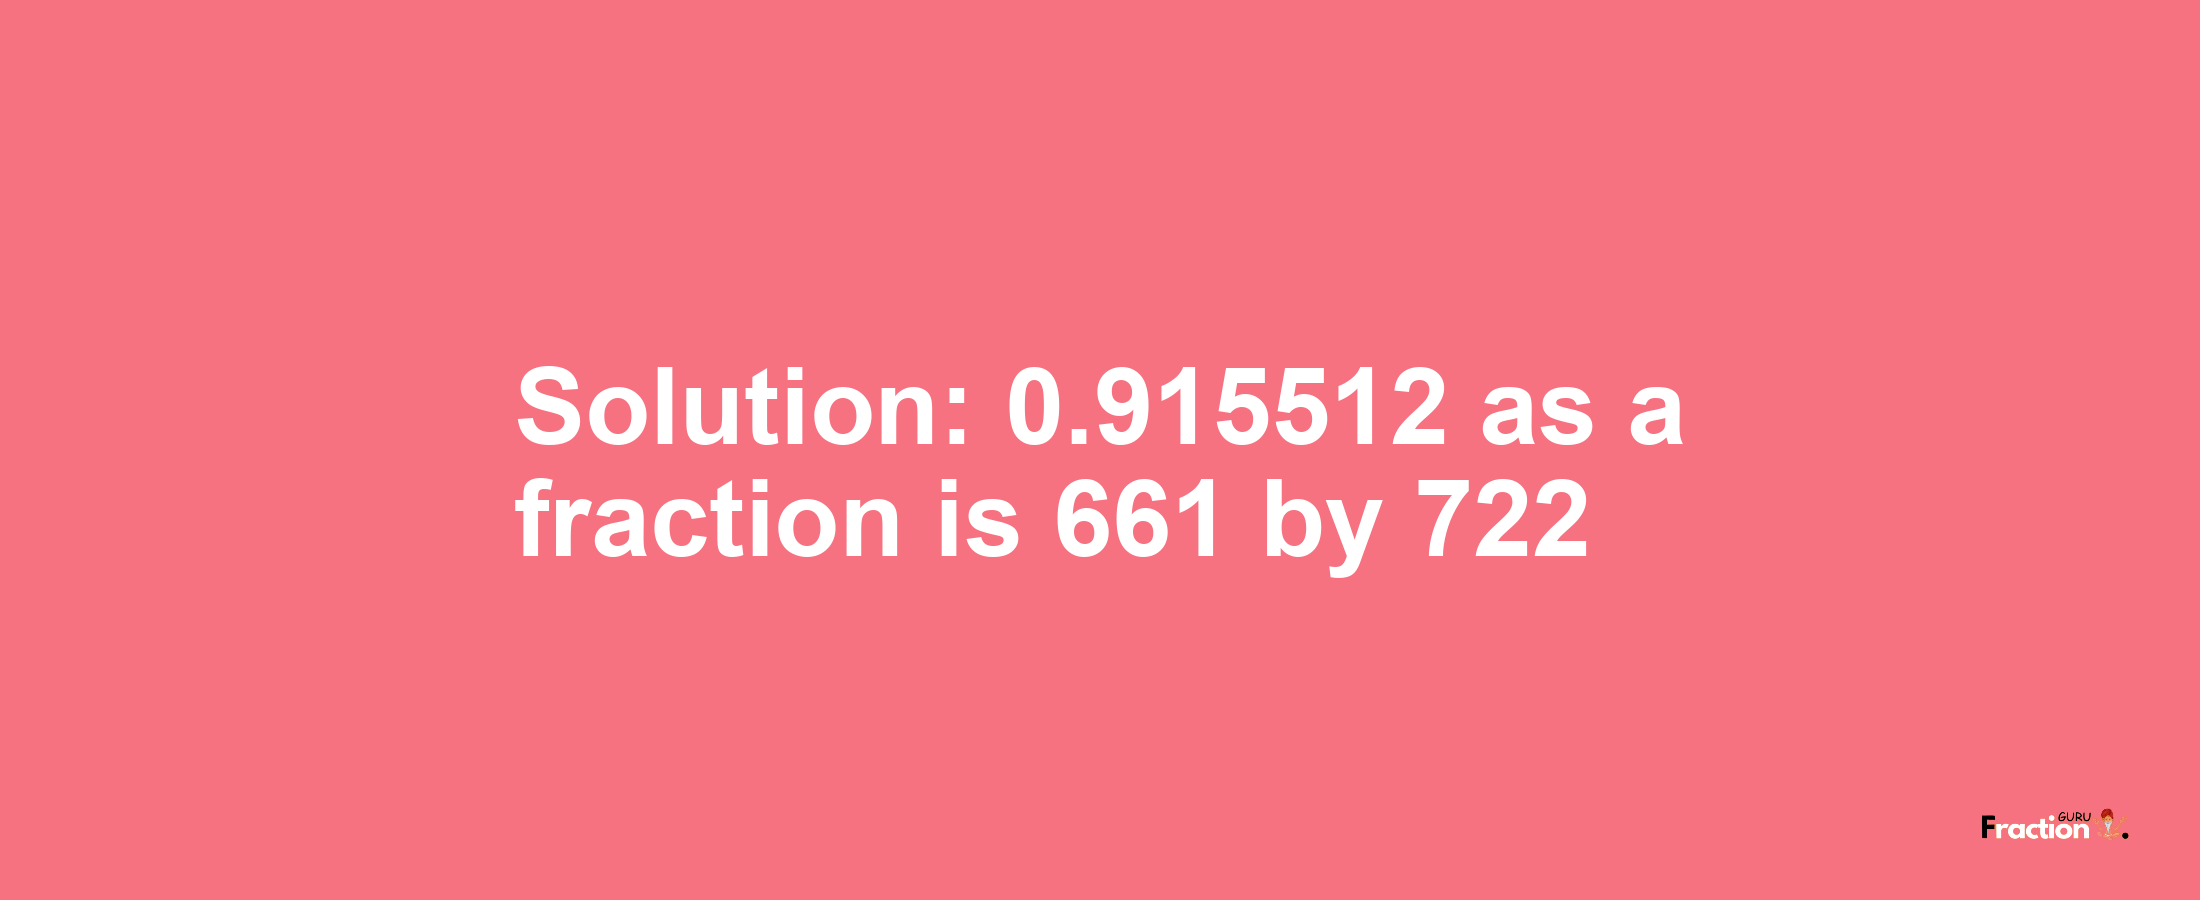 Solution:0.915512 as a fraction is 661/722